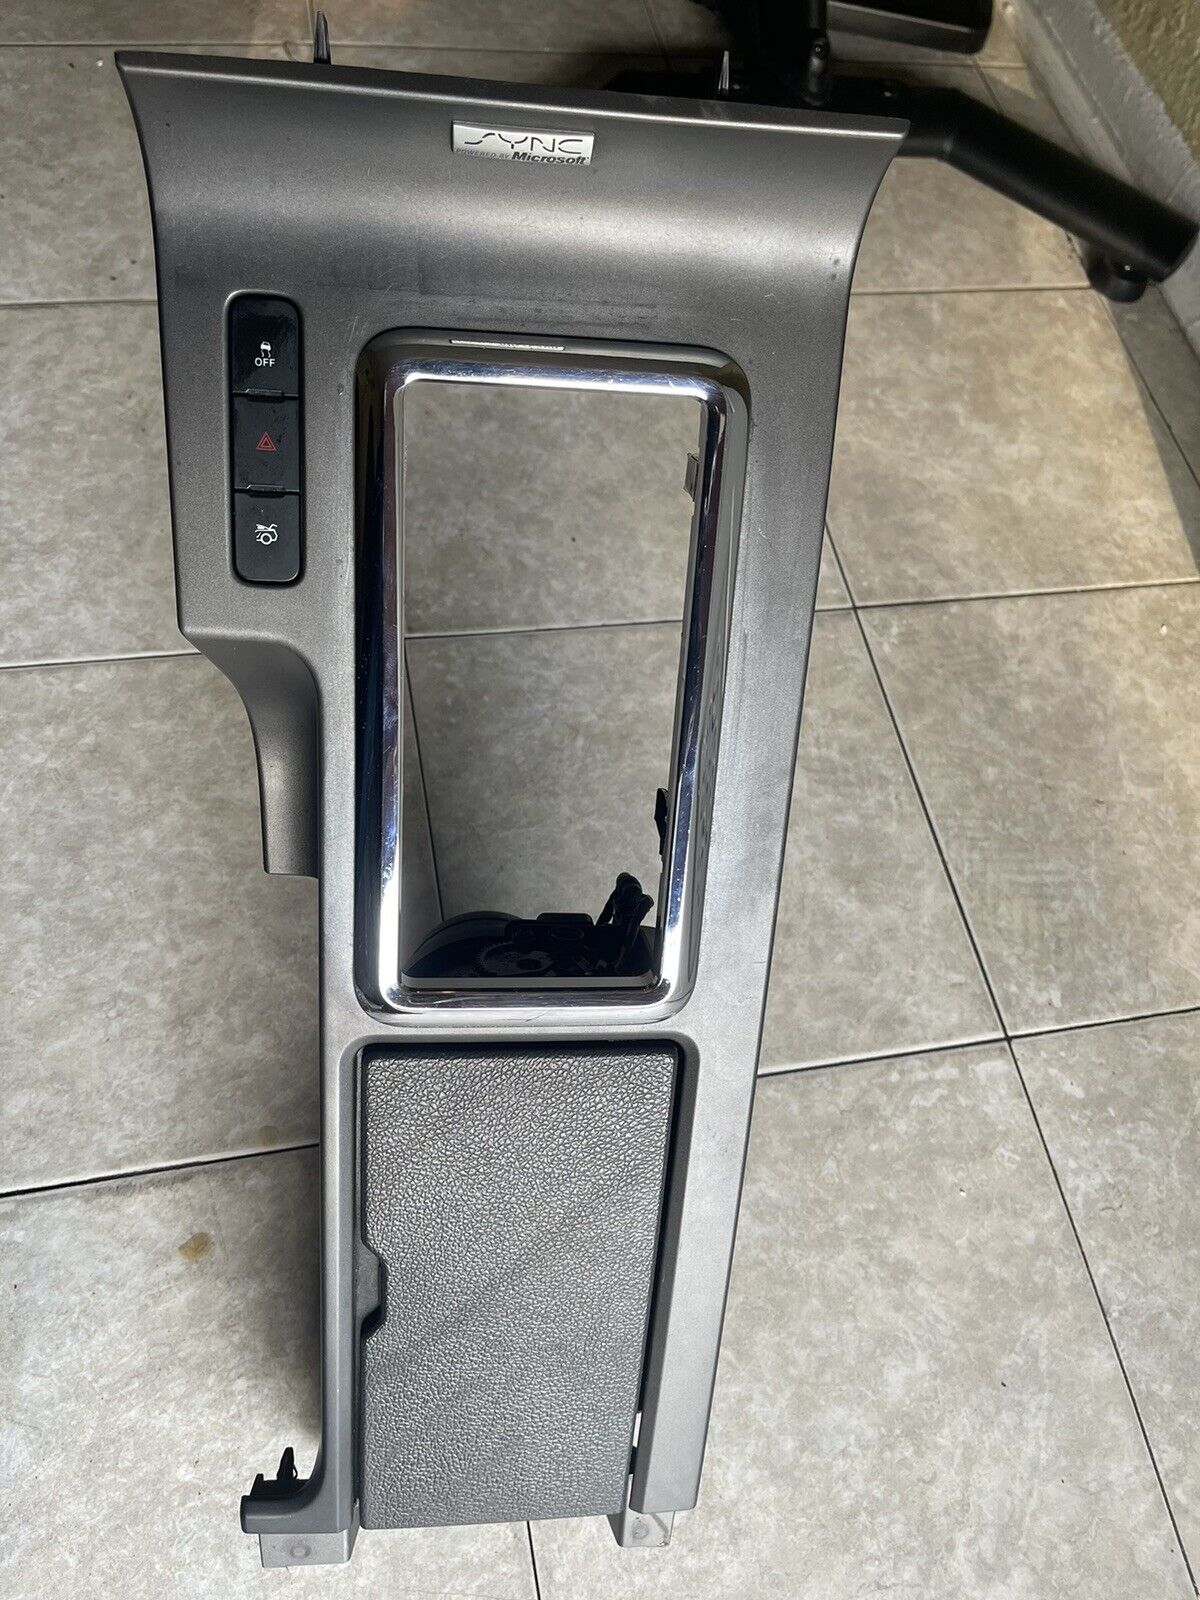 2014 Ford mustang gt front center console with Chrome trim